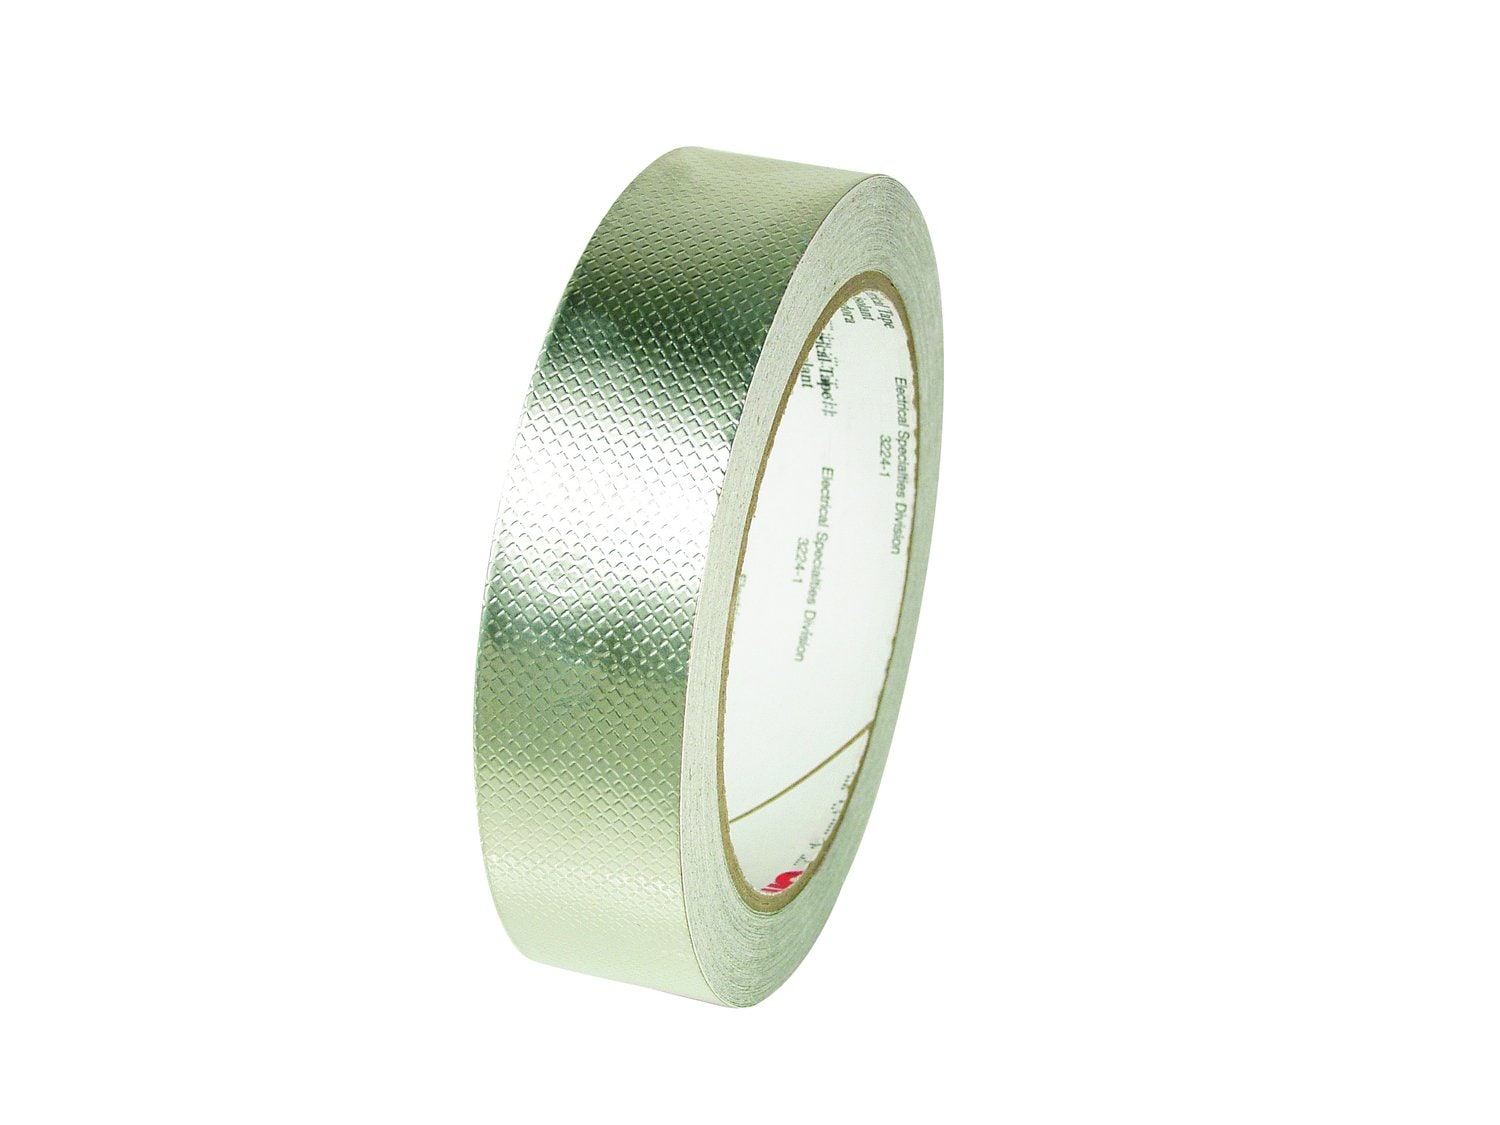 16 Feet of 2 Inch Wide Copper Foil Tape with Adhesive - Ideal for EMI  Shielding